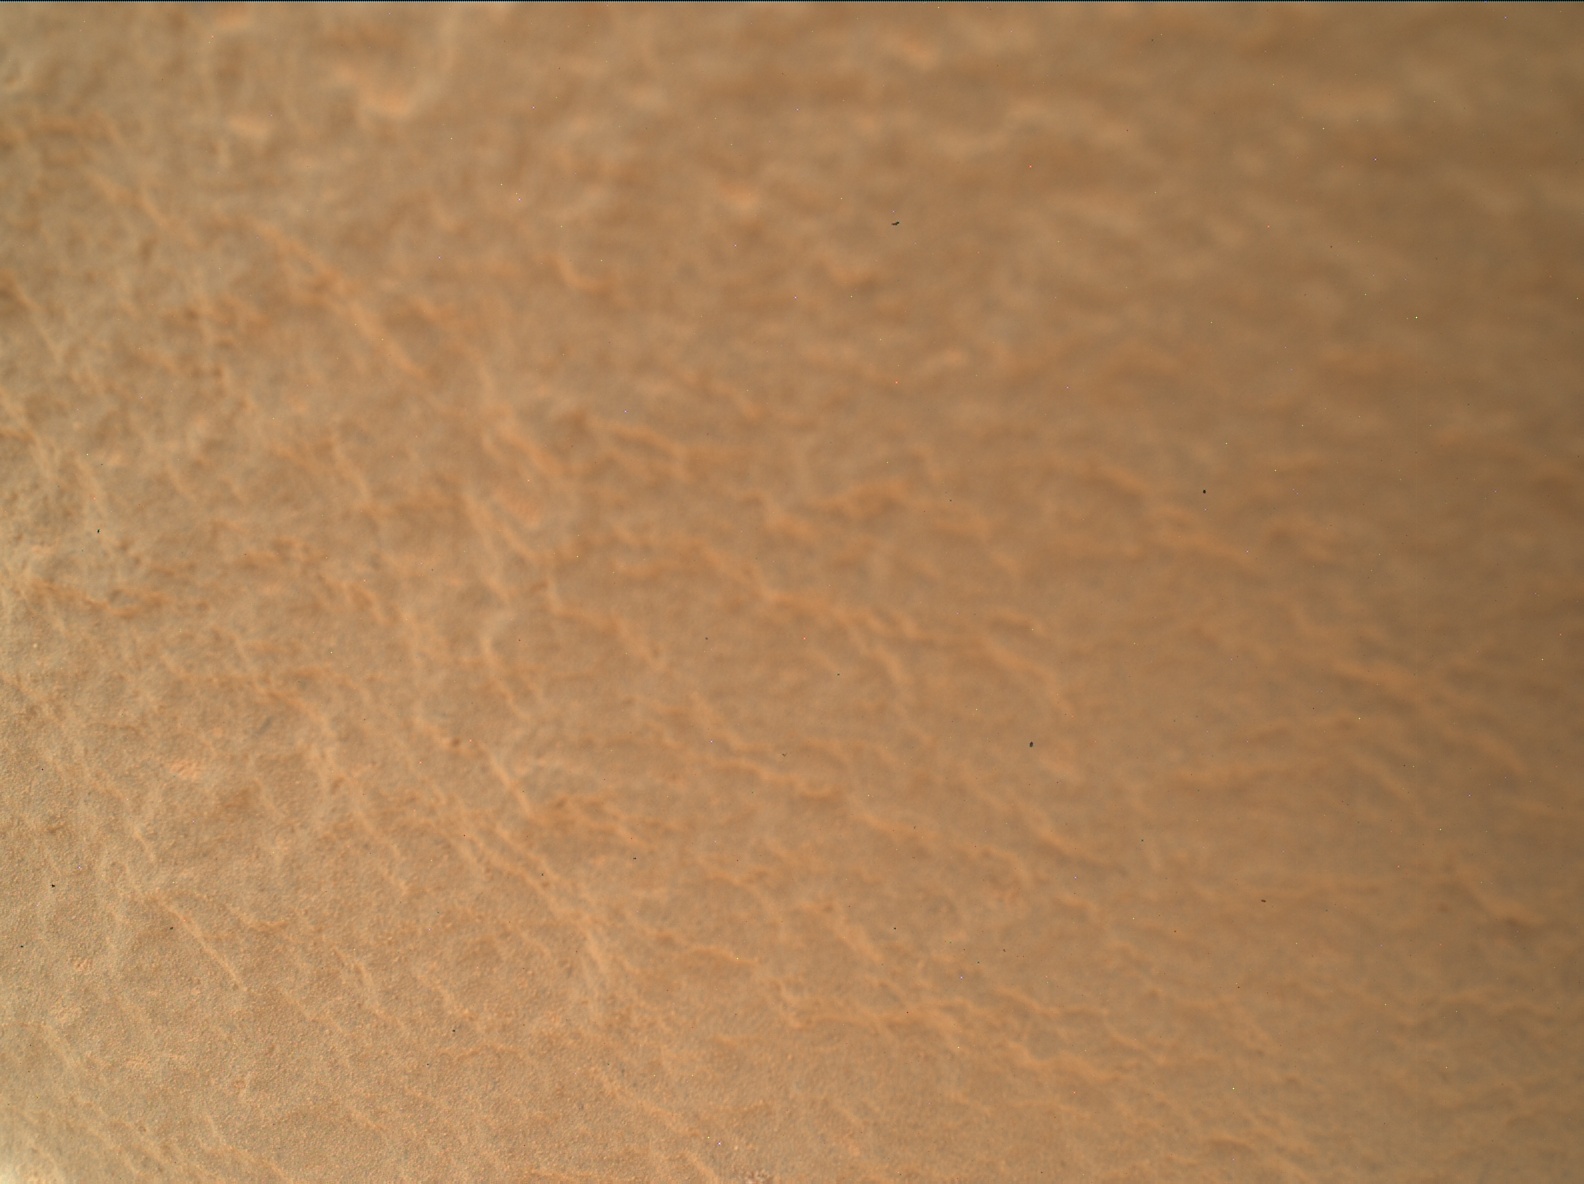 Nasa's Mars rover Curiosity acquired this image using its Mars Hand Lens Imager (MAHLI) on Sol 3771